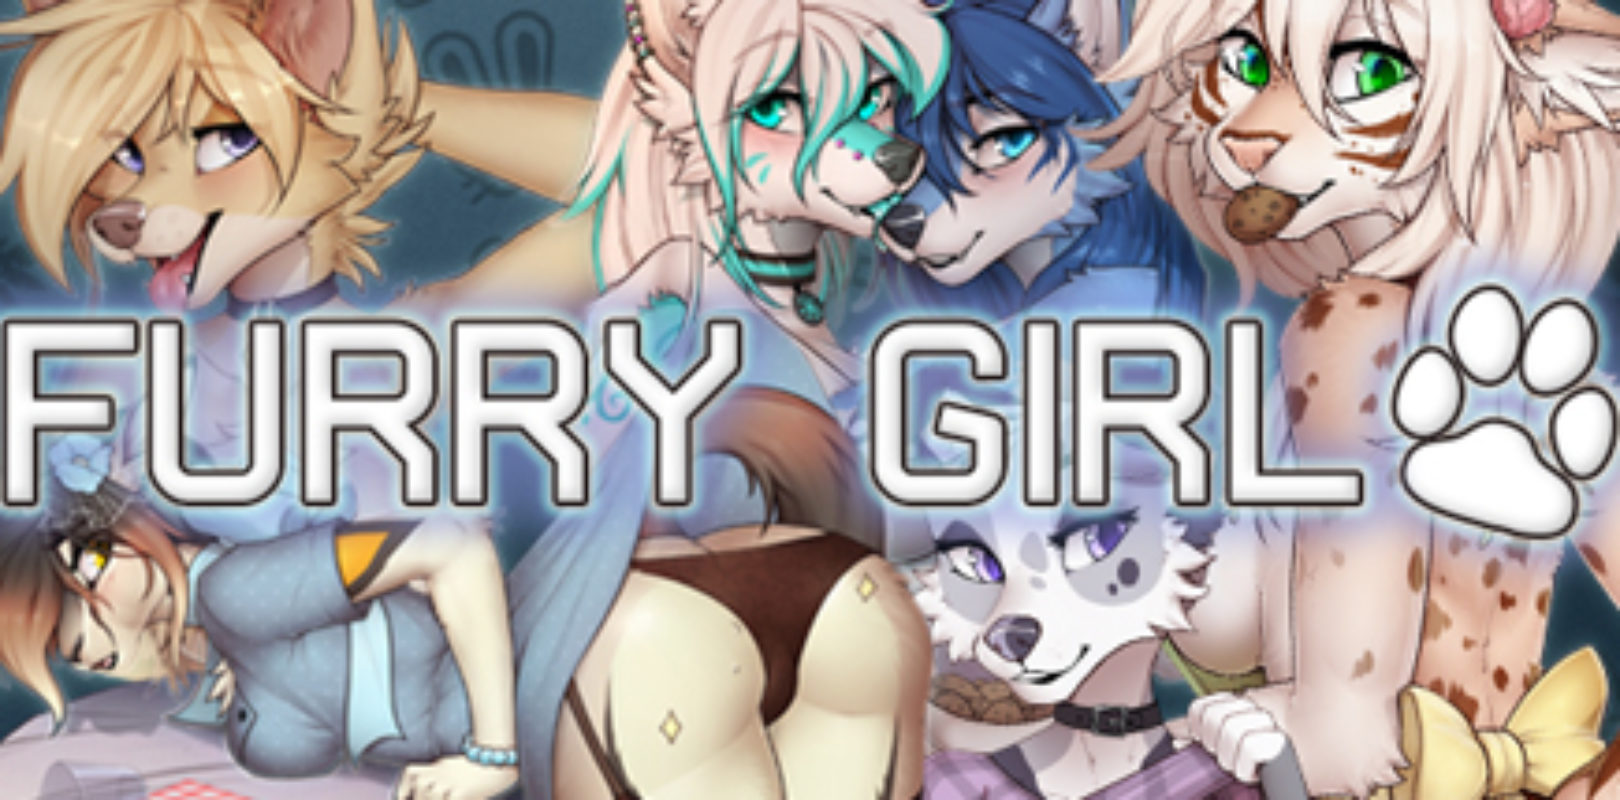 Furry Girl Steam Keys Giveaway Pivotal Gamers - furry girl roblox